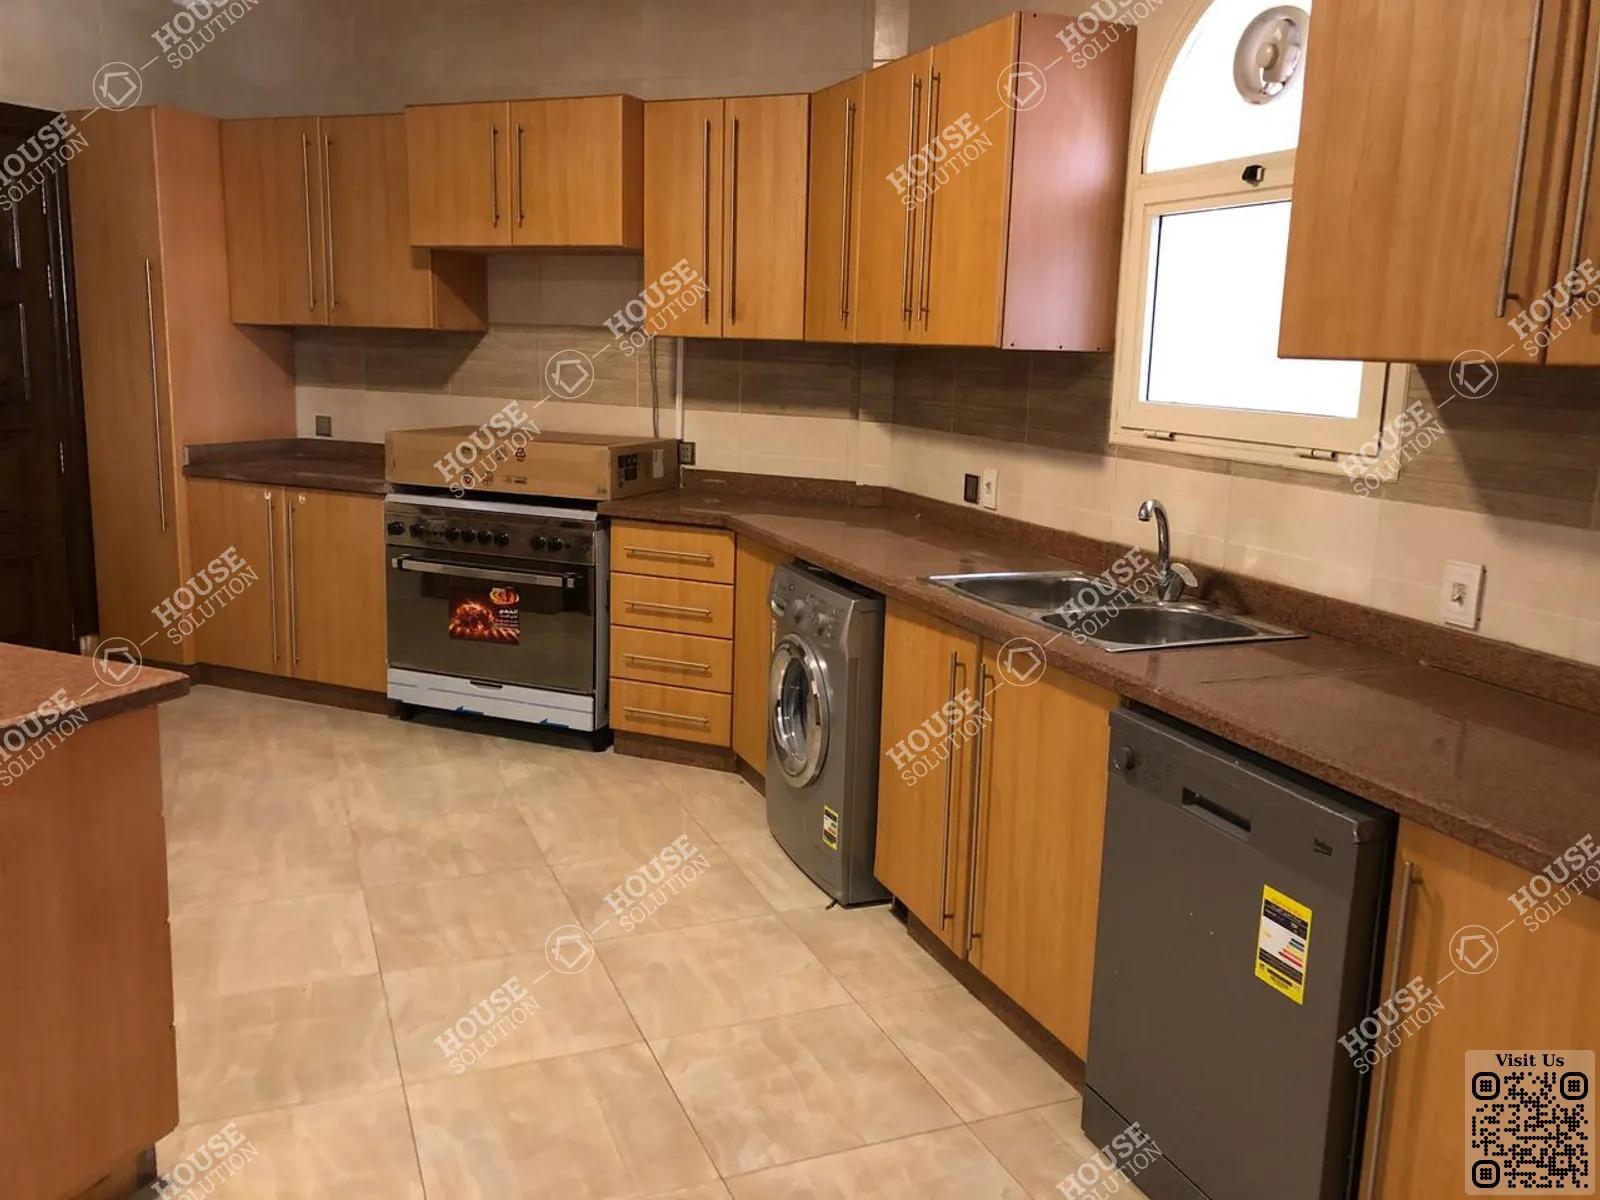 KITCHEN  @ Apartments For Rent In Maadi Maadi Sarayat Area: 320 m² consists of 4 Bedrooms 3 Bathrooms Modern furnished 5 stars #5459-2